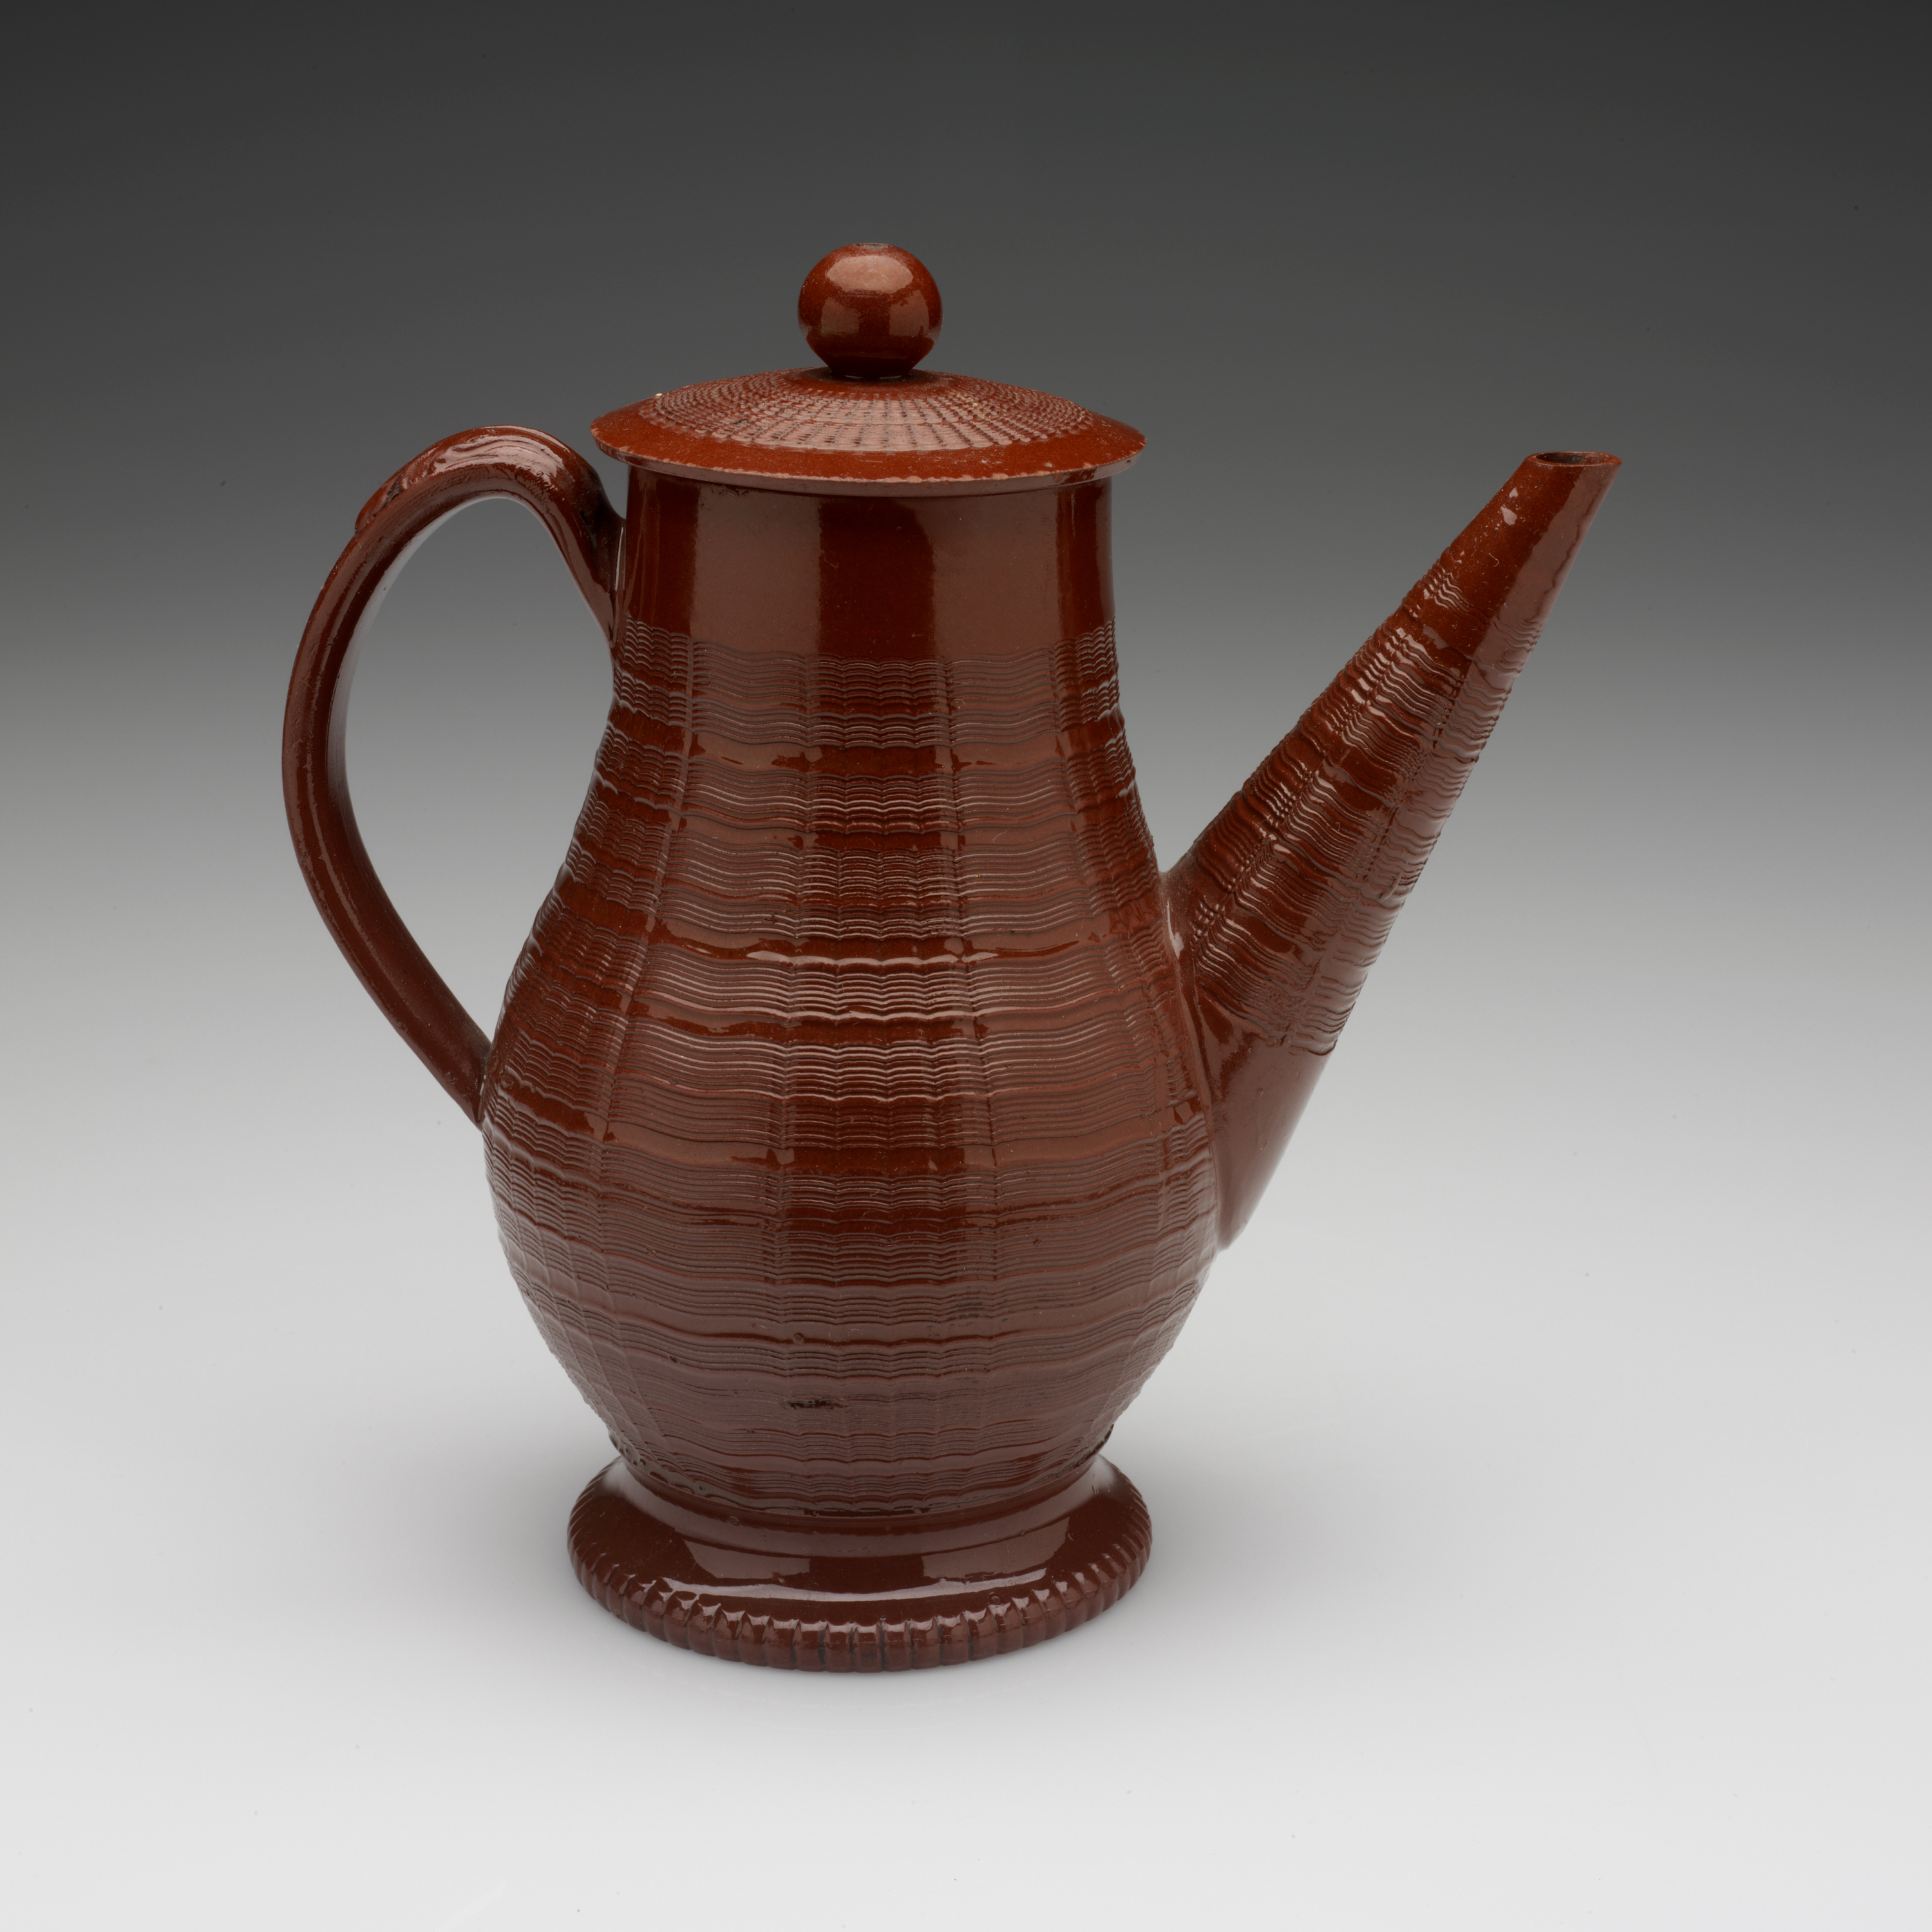 /A%20brown%20stoneware%20coffee%20pot%20with%20a%20long%20straight%20spout%2C%20handle%2C%20foot%2C%20and%20lid%20with%20decorative%20horizontal%20grooves%20and%20projecting%20grooves.%20The%20final%20which%20is%20spherical%20in%20shape.